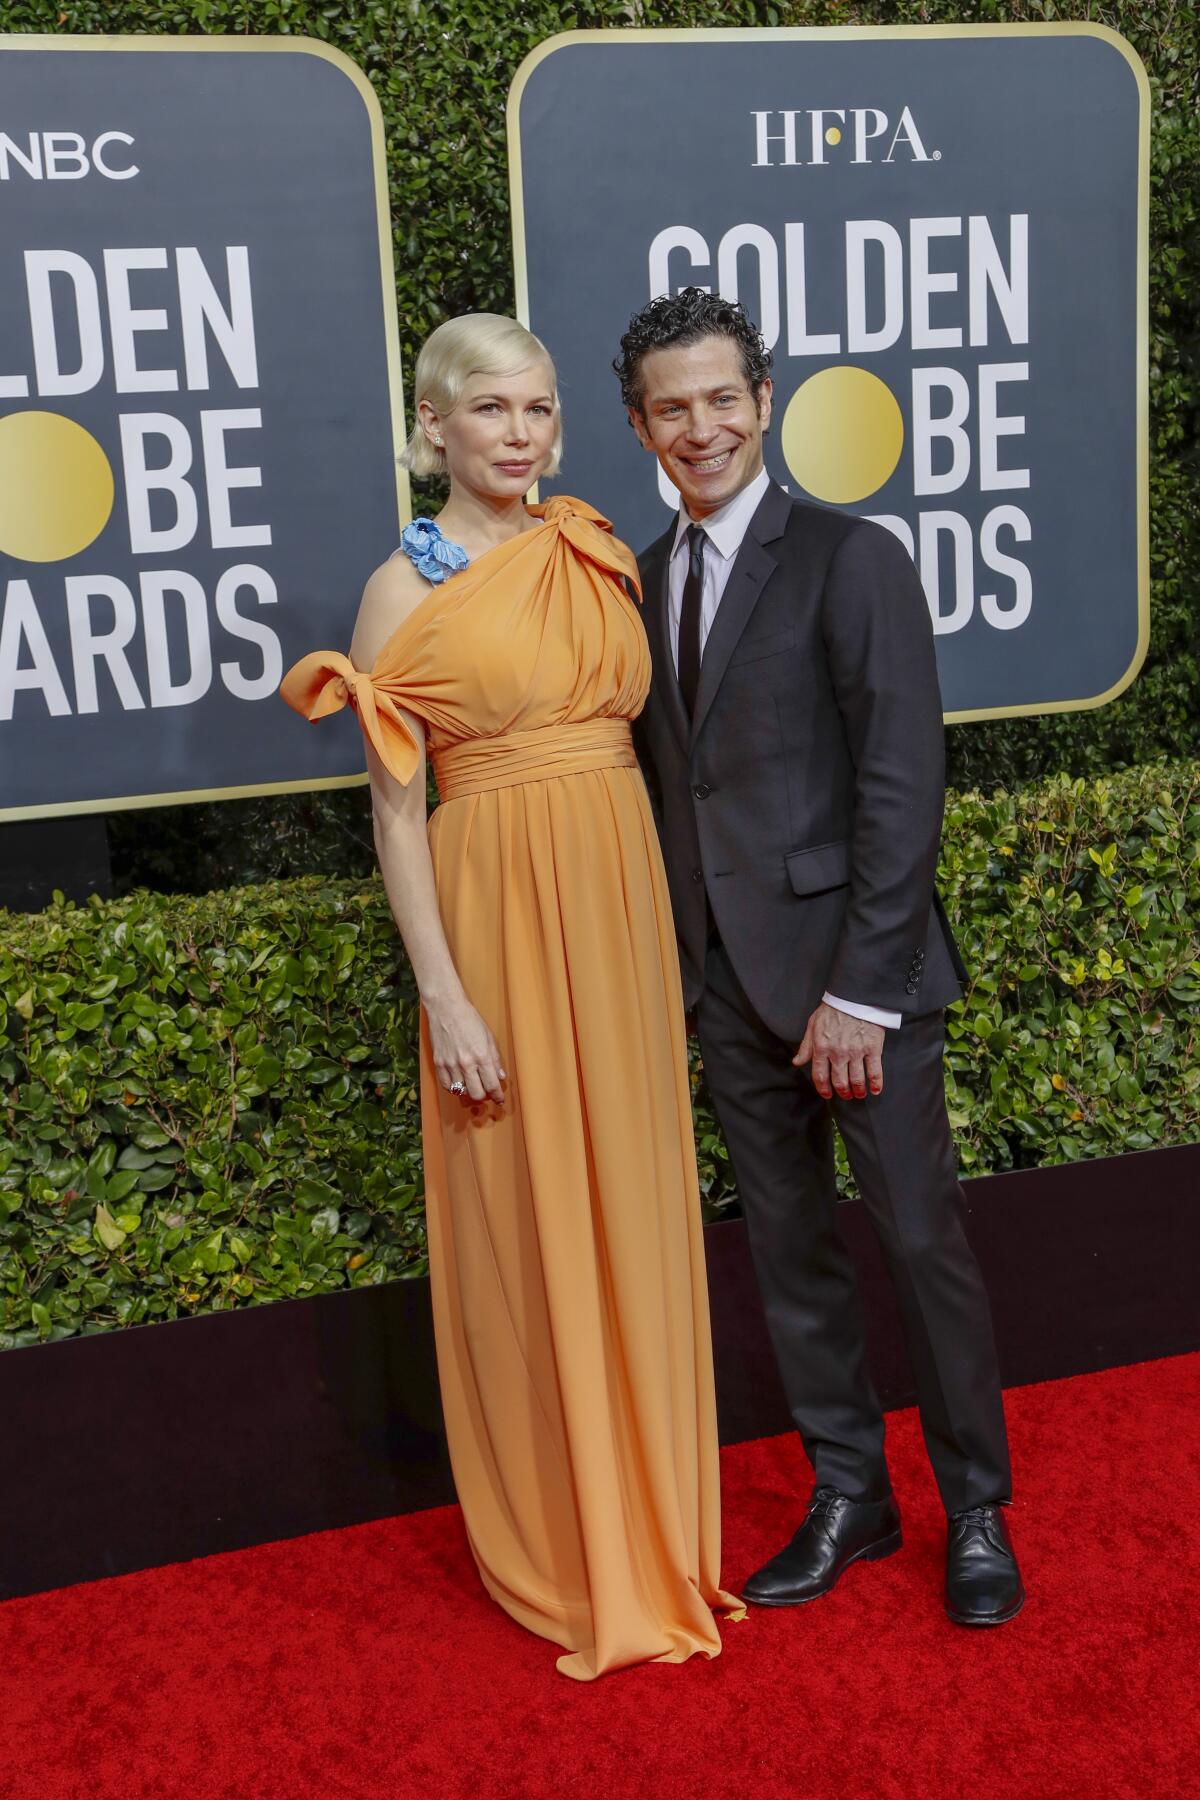 Michelle Williams and Thomas Kall arriving at the 77th Golden Globe Awards at the Beverly Hilton.